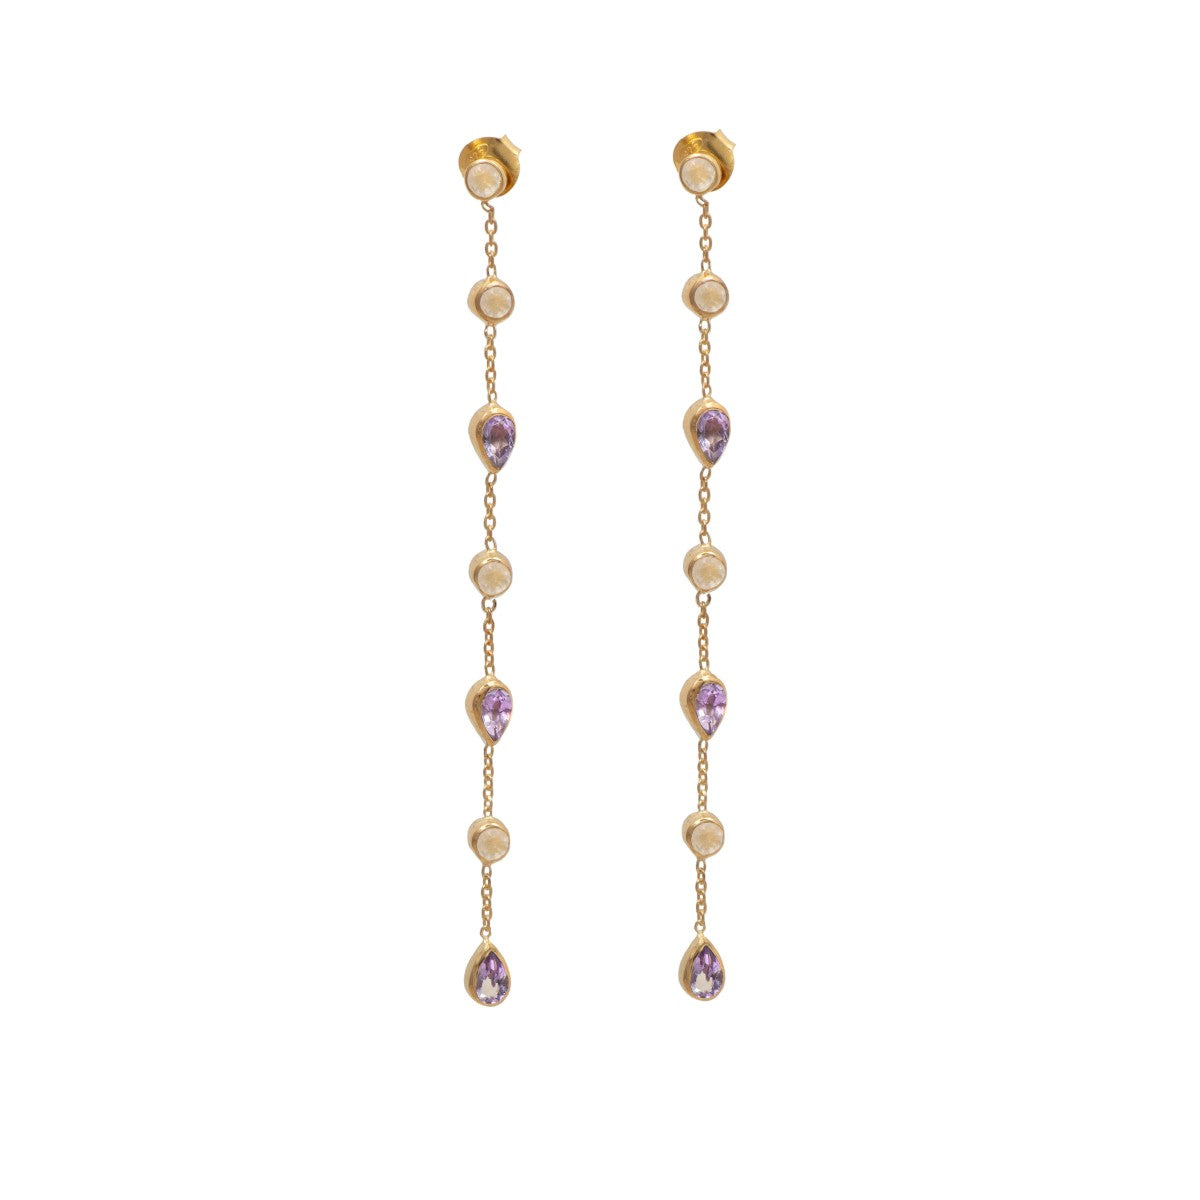 Long fine earrings with small round and teardrop gemstones - Rose Quartz and Amethyst